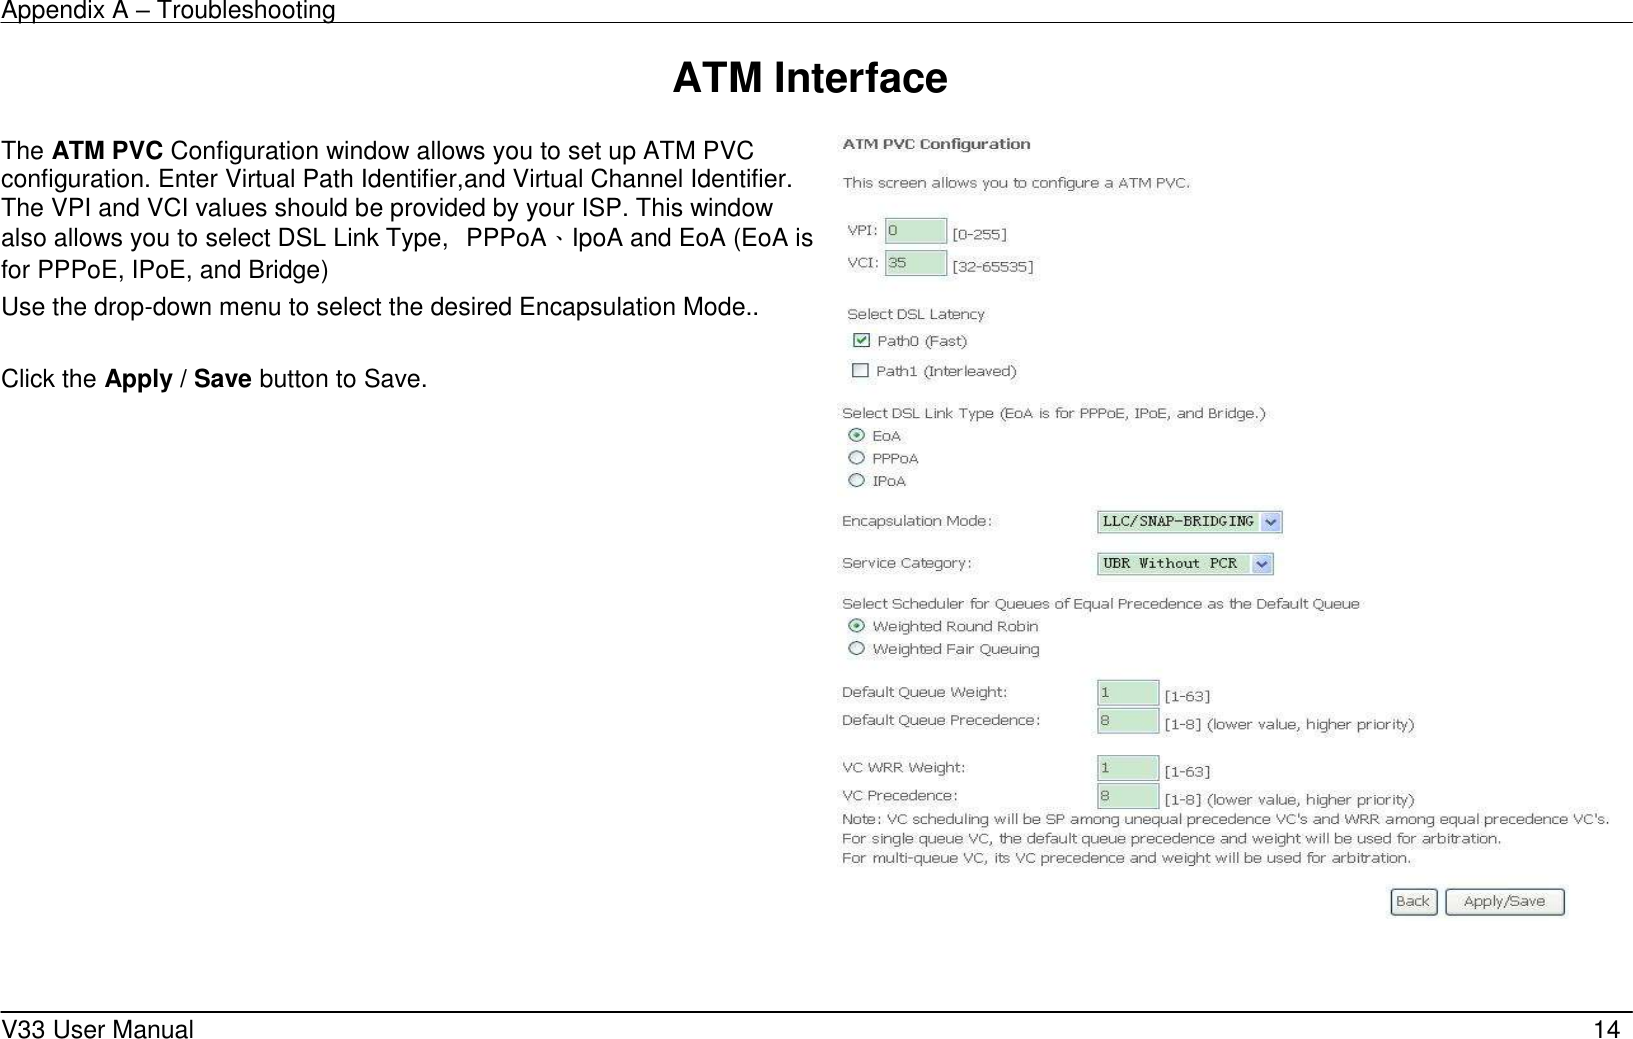 Appendix A – Troubleshooting    V33 User Manual   14 ATM Interface           The ATM PVC Configuration window allows you to set up ATM PVC configuration. Enter Virtual Path Identifier,and Virtual Channel Identifier. The VPI and VCI values should be provided by your ISP. This window also allows you to select DSL Link Type,  PPPoA、IpoA and EoA (EoA is for PPPoE, IPoE, and Bridge) Use the drop-down menu to select the desired Encapsulation Mode..  Click the Apply / Save button to Save.         